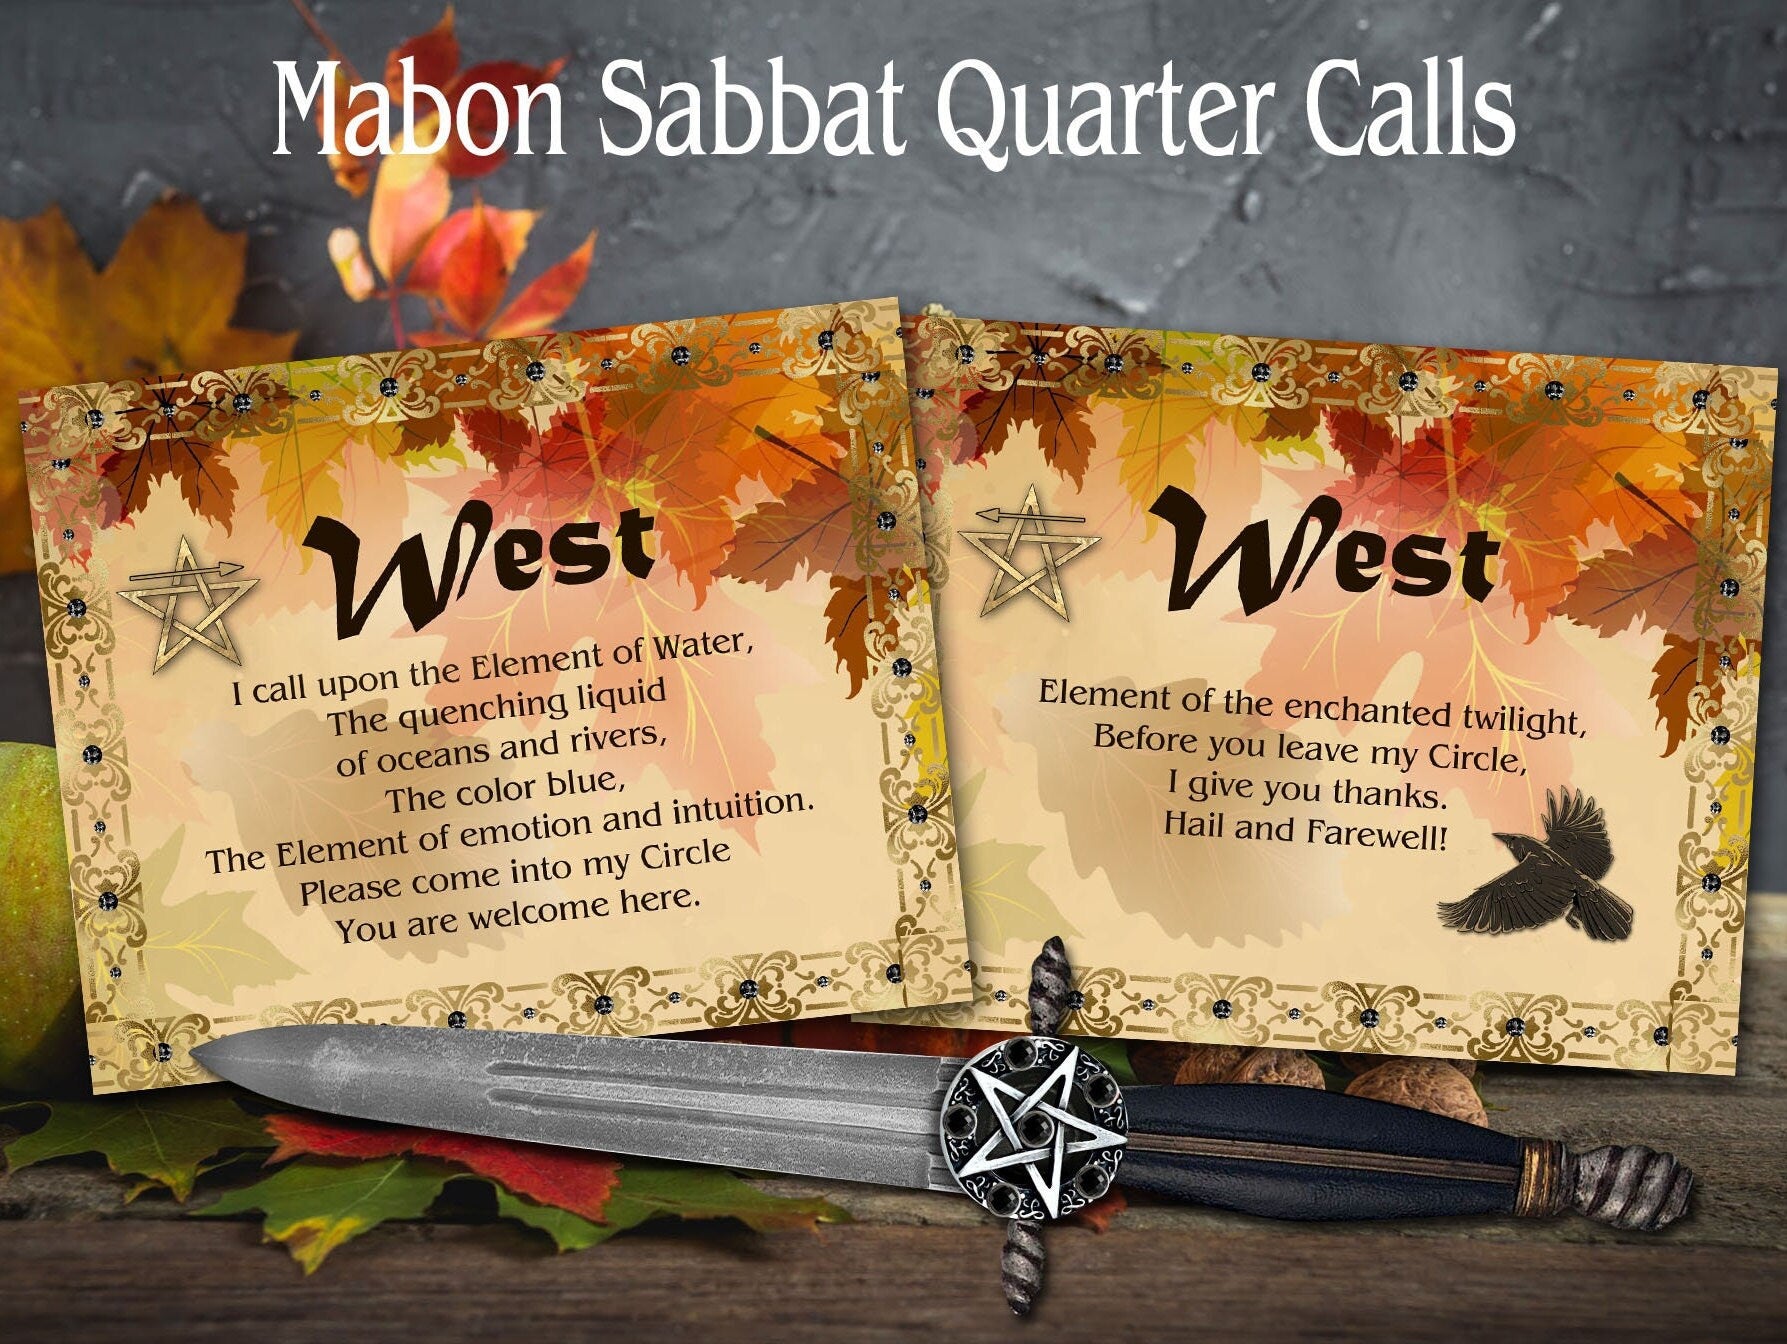 WEST QUARTER CALLS, 2 Cards to Call and Release the Quarters, with invoking and banishing Pentagram diagram included, Printable Cards - Morgana Magick Spell